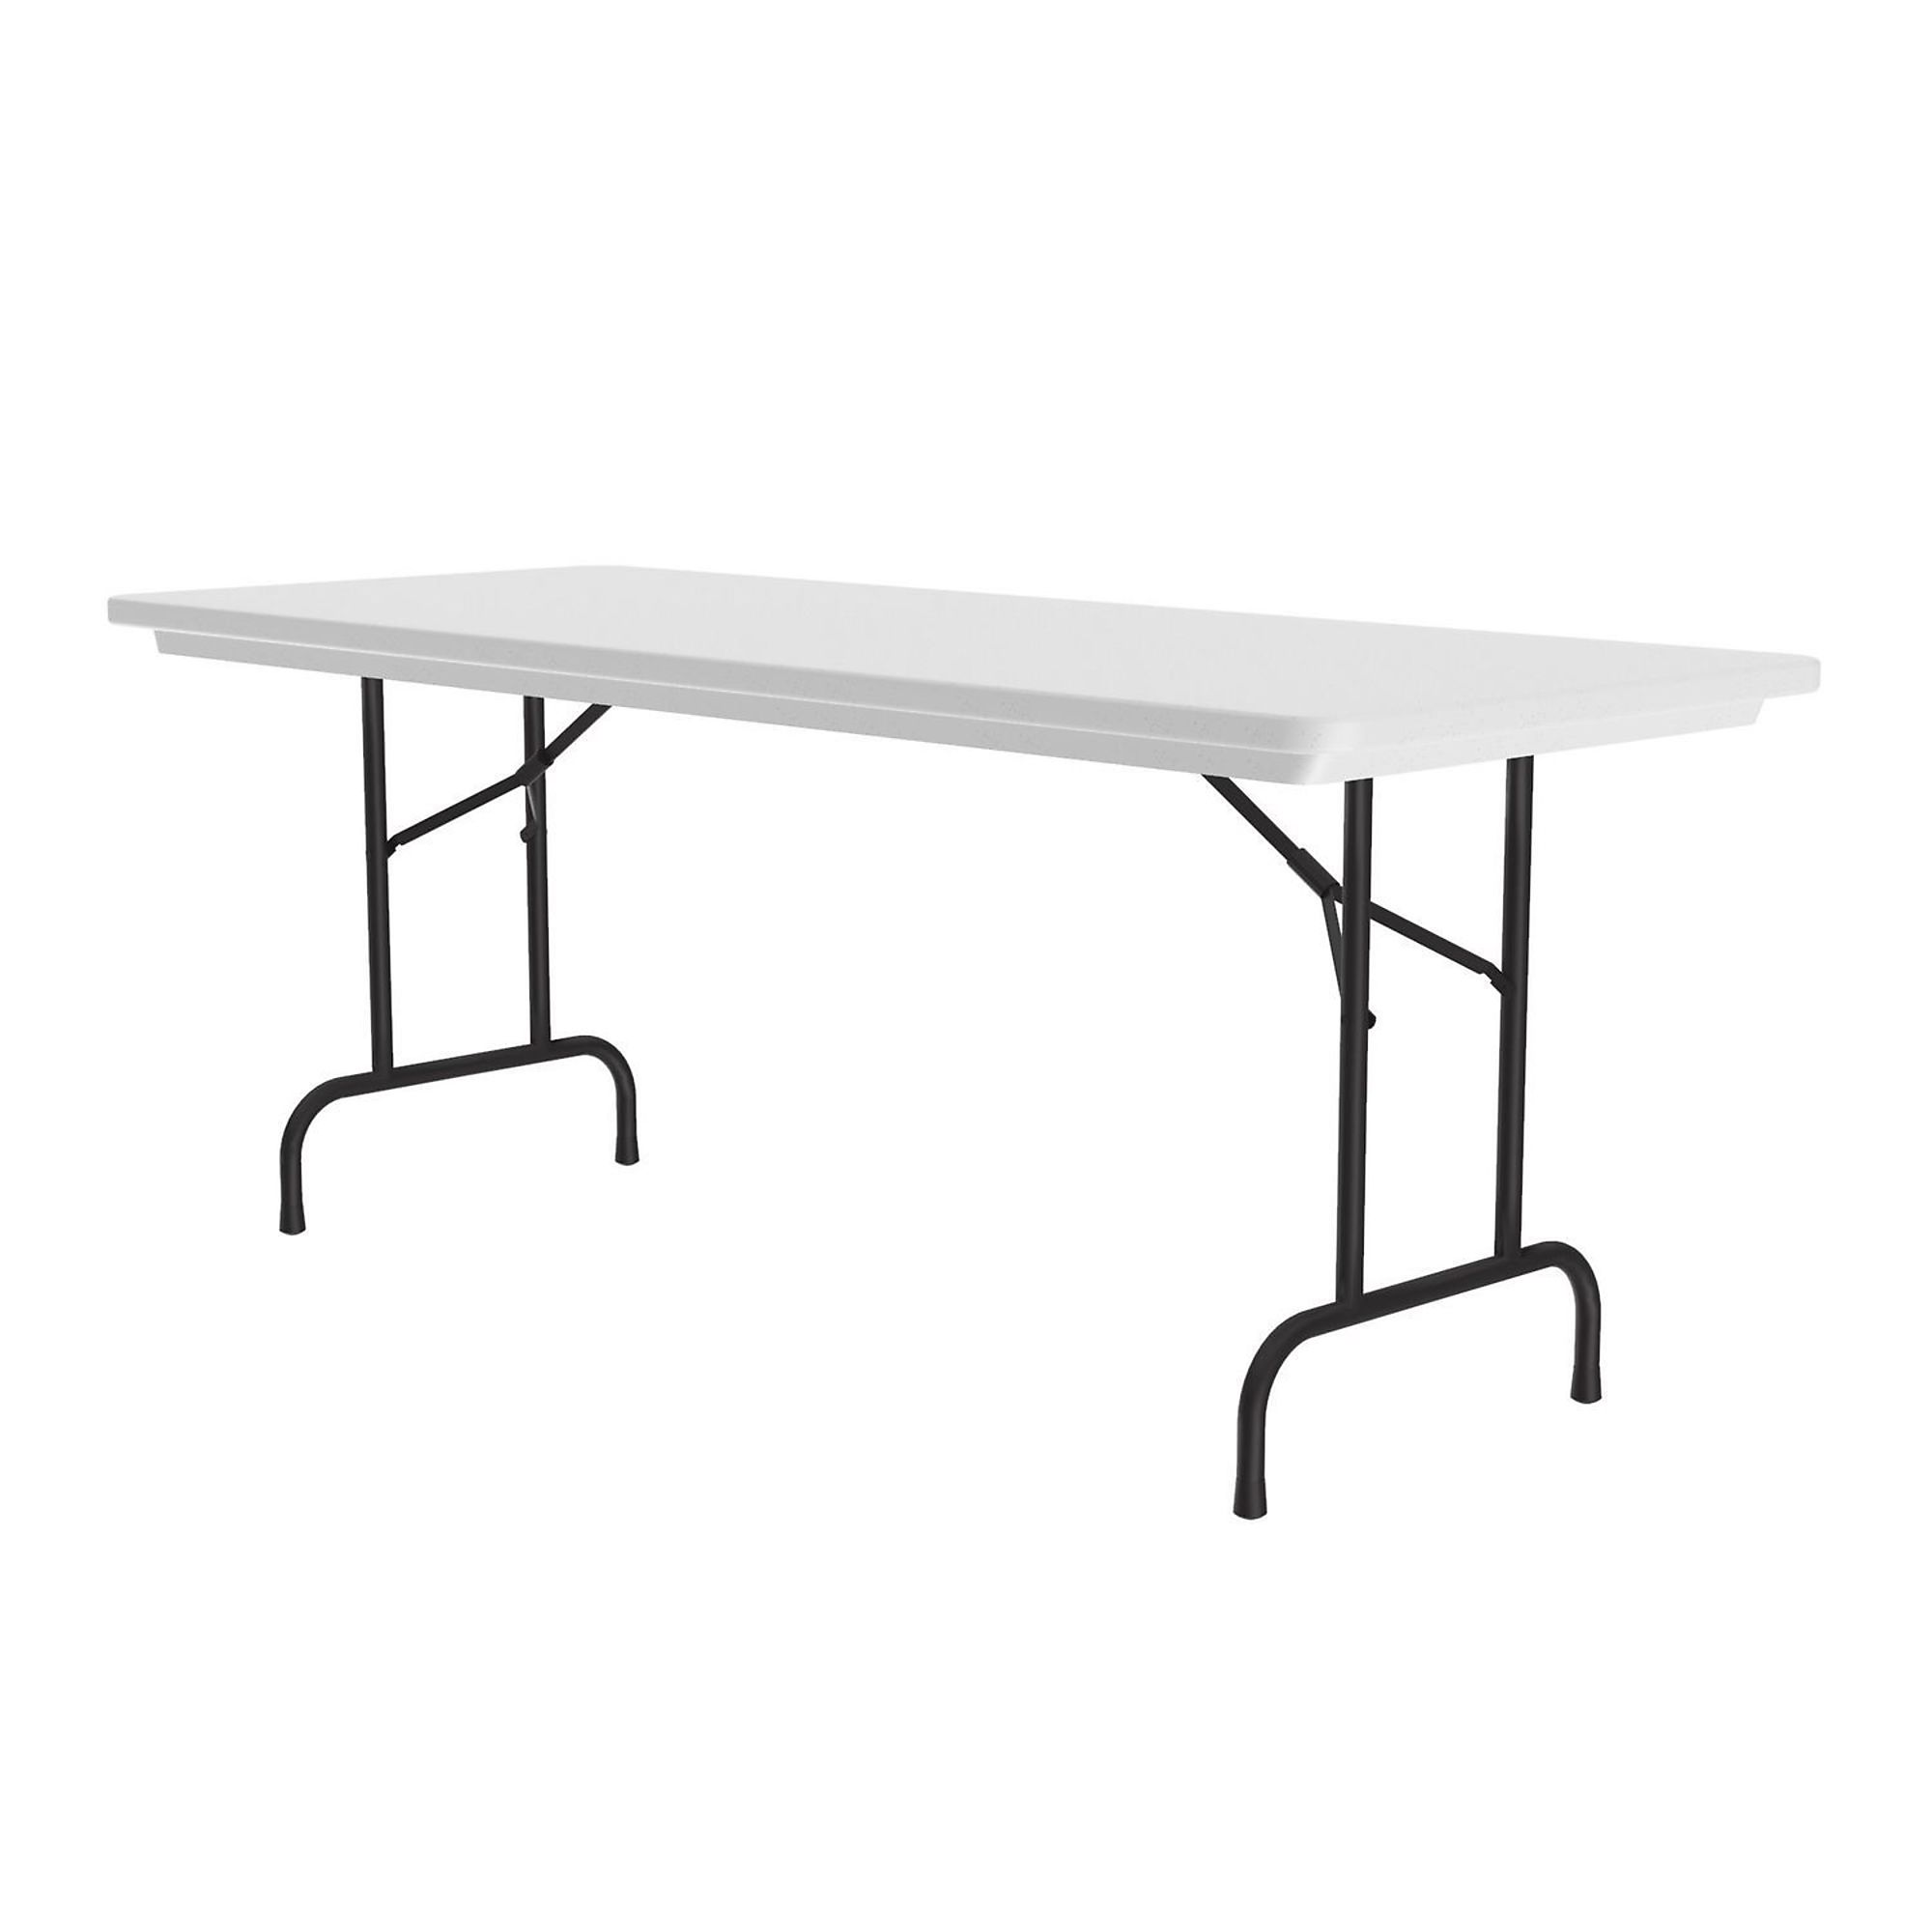 Correll, Plastic Folding Table, Gray Granite Top, 30x72, Height 29 in, Width 30 in, Length 72 in, Model R3072-23